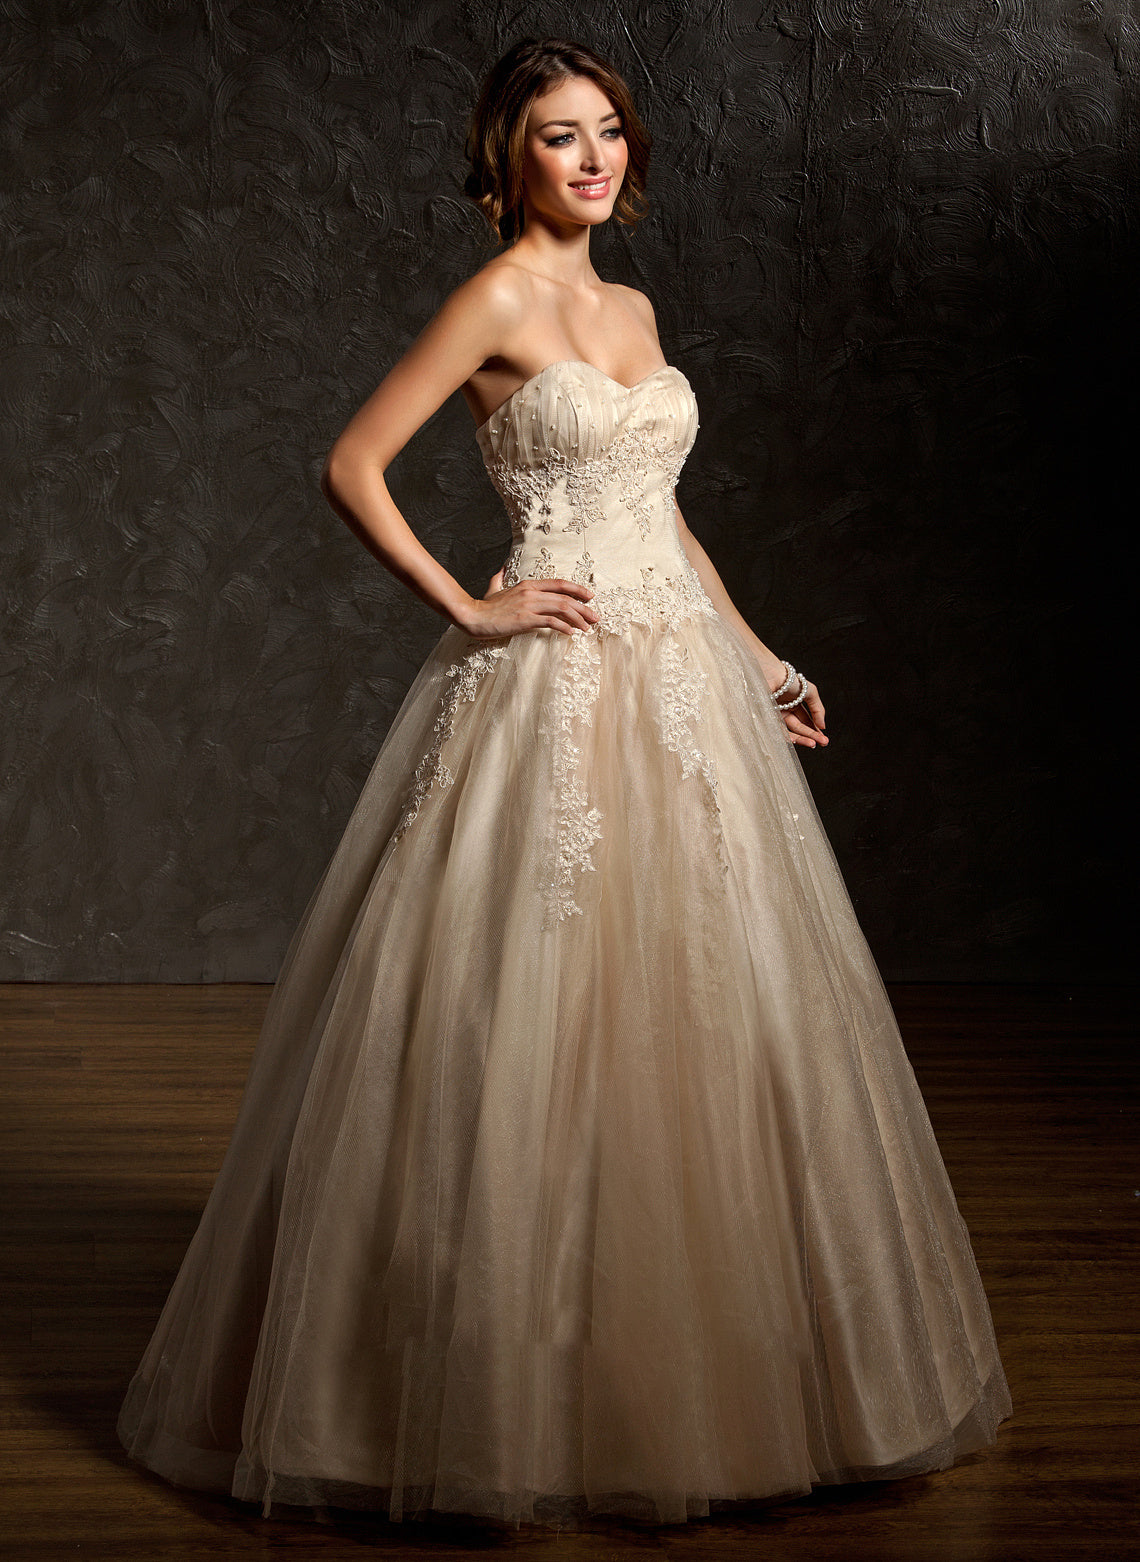 Lace Ball-Gown/Princess Prom Dresses Ruffle Appliques Tulle Floor-Length With Sweetheart Yesenia Beading Sequins